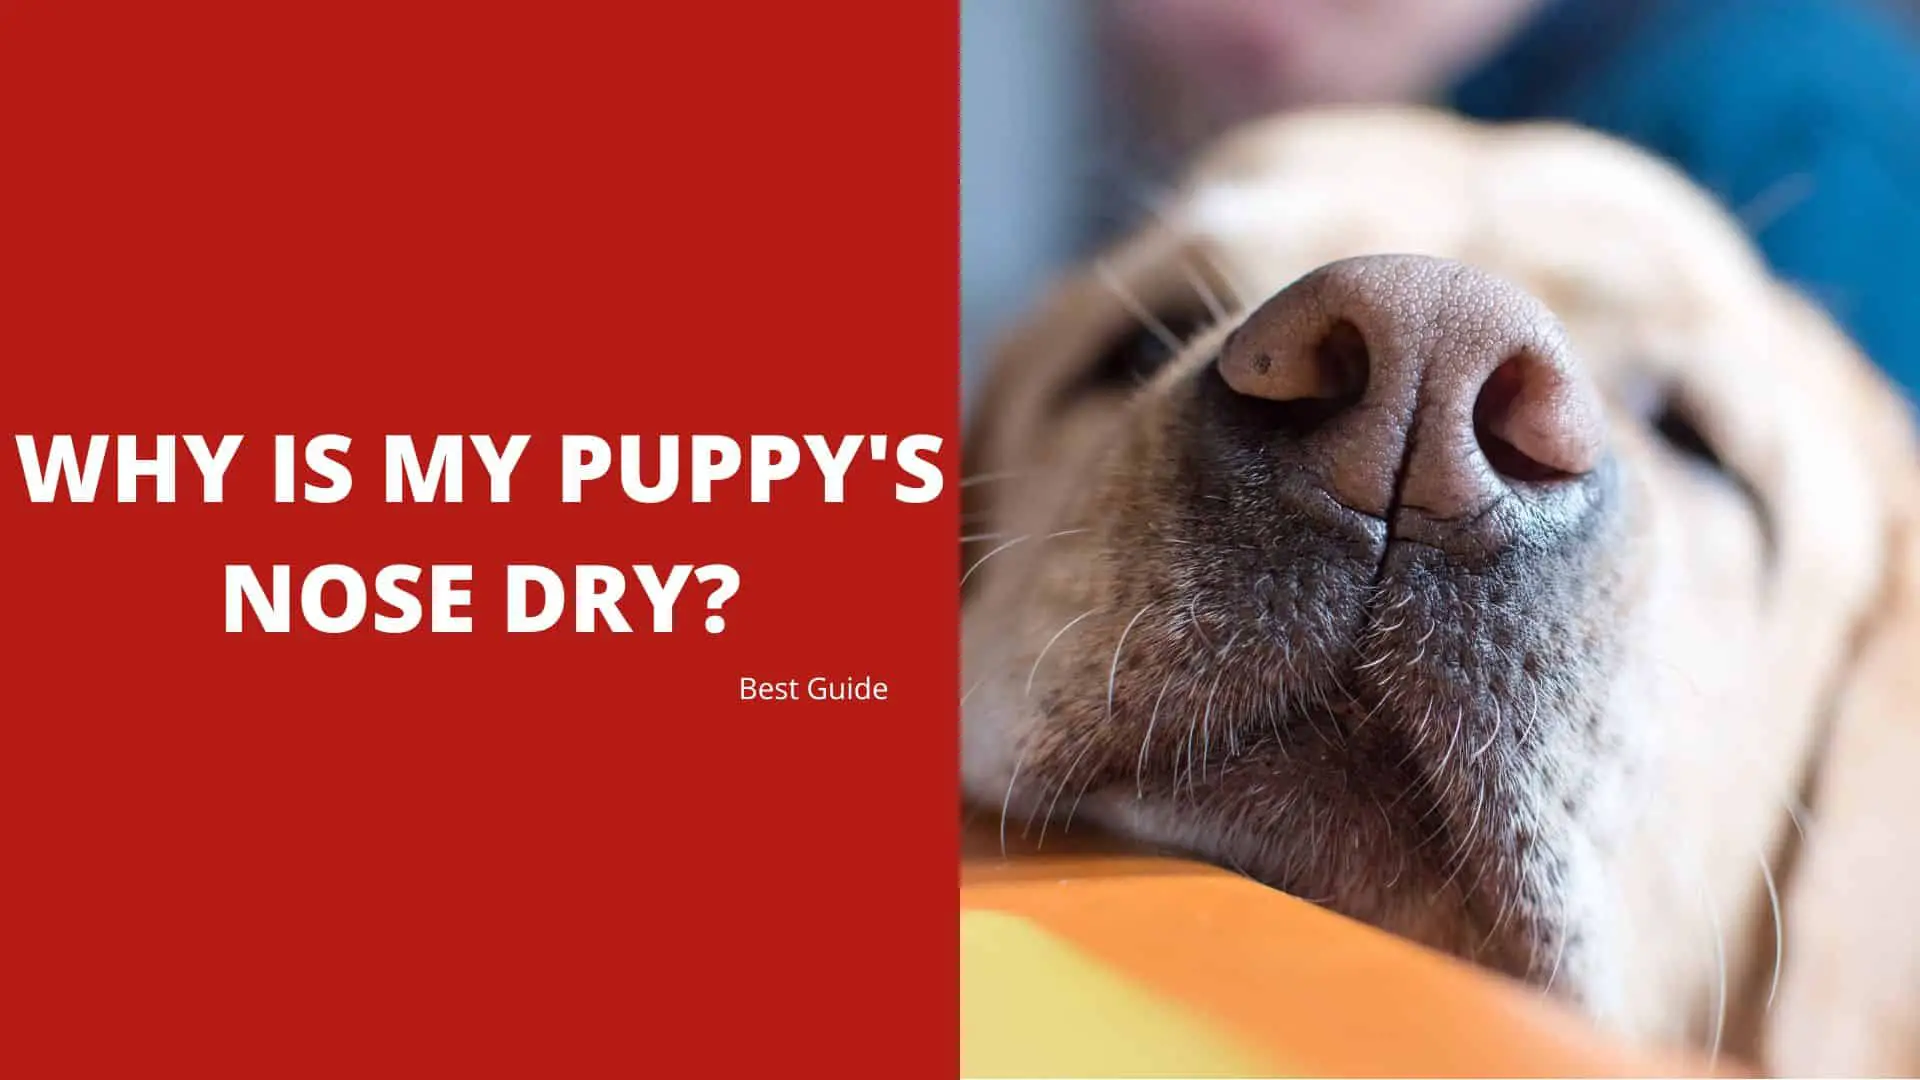 Why Is My Puppy’s Nose Dry? Best Guide 2022